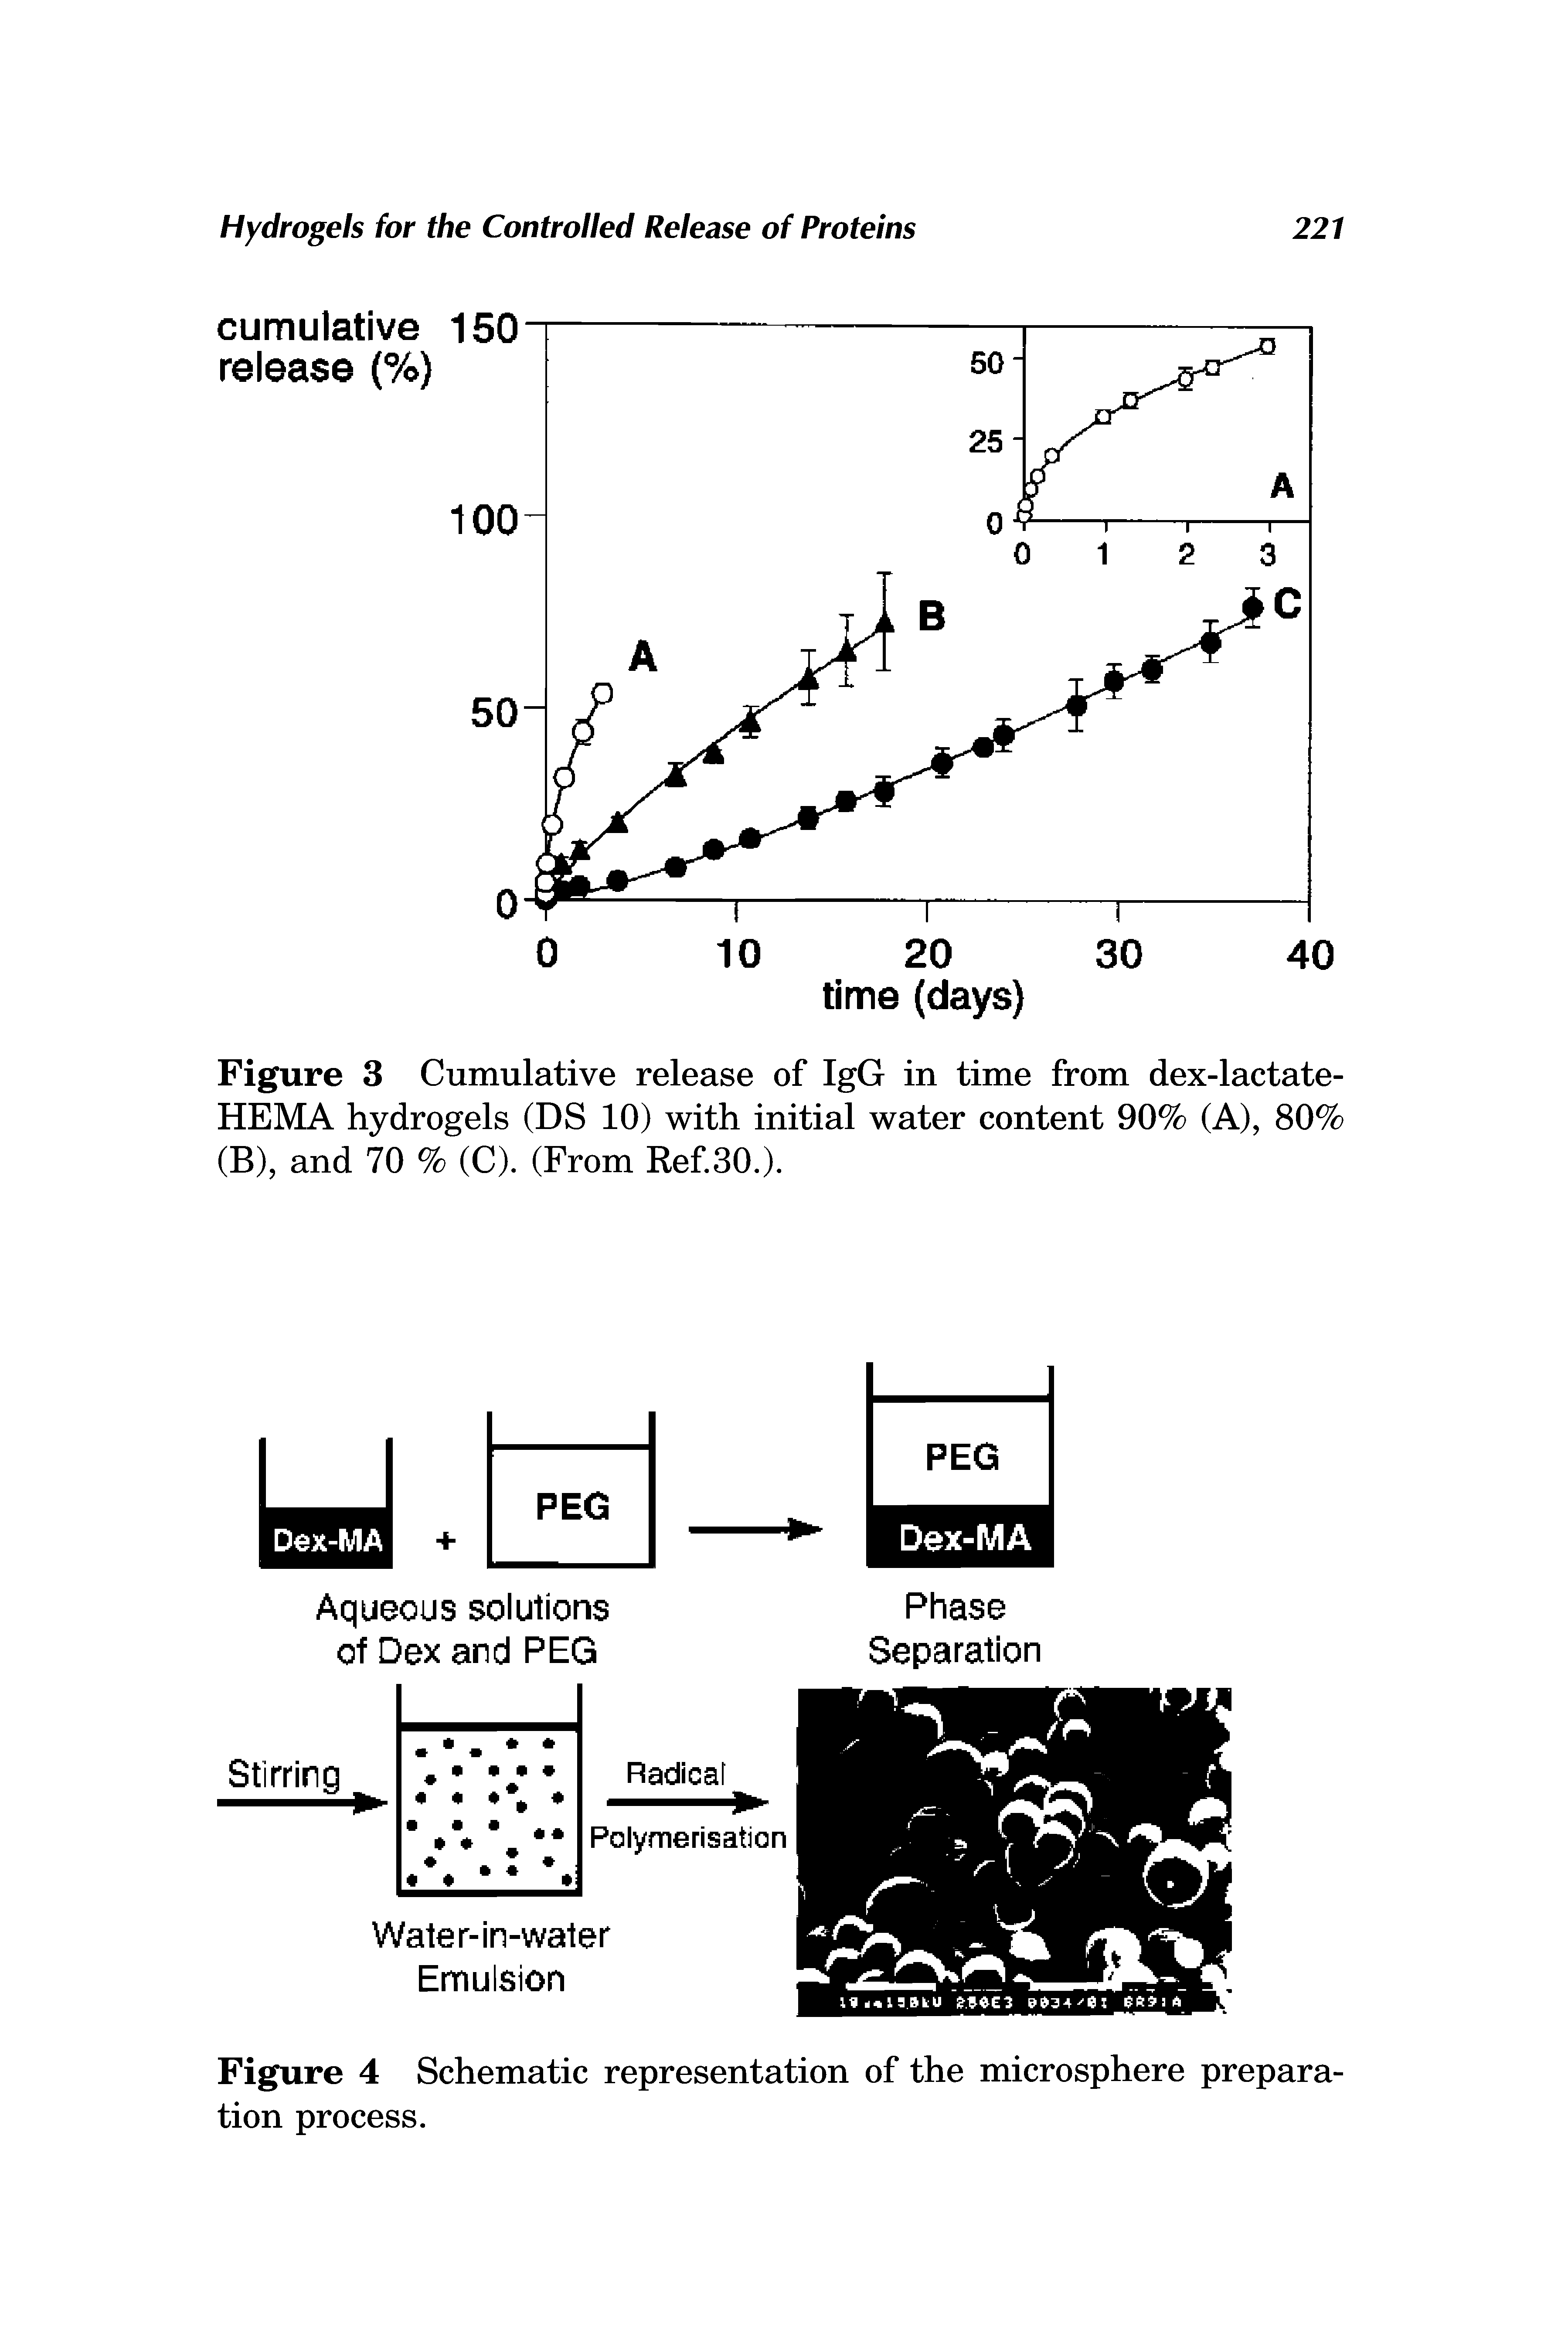 Figure 3 Cumulative release of IgG in time from dex-lactate-HEMA hydrogels (DS 10) with initial water content 90% (A), 80% (B), and 70 % (C). (From Ref 30.).